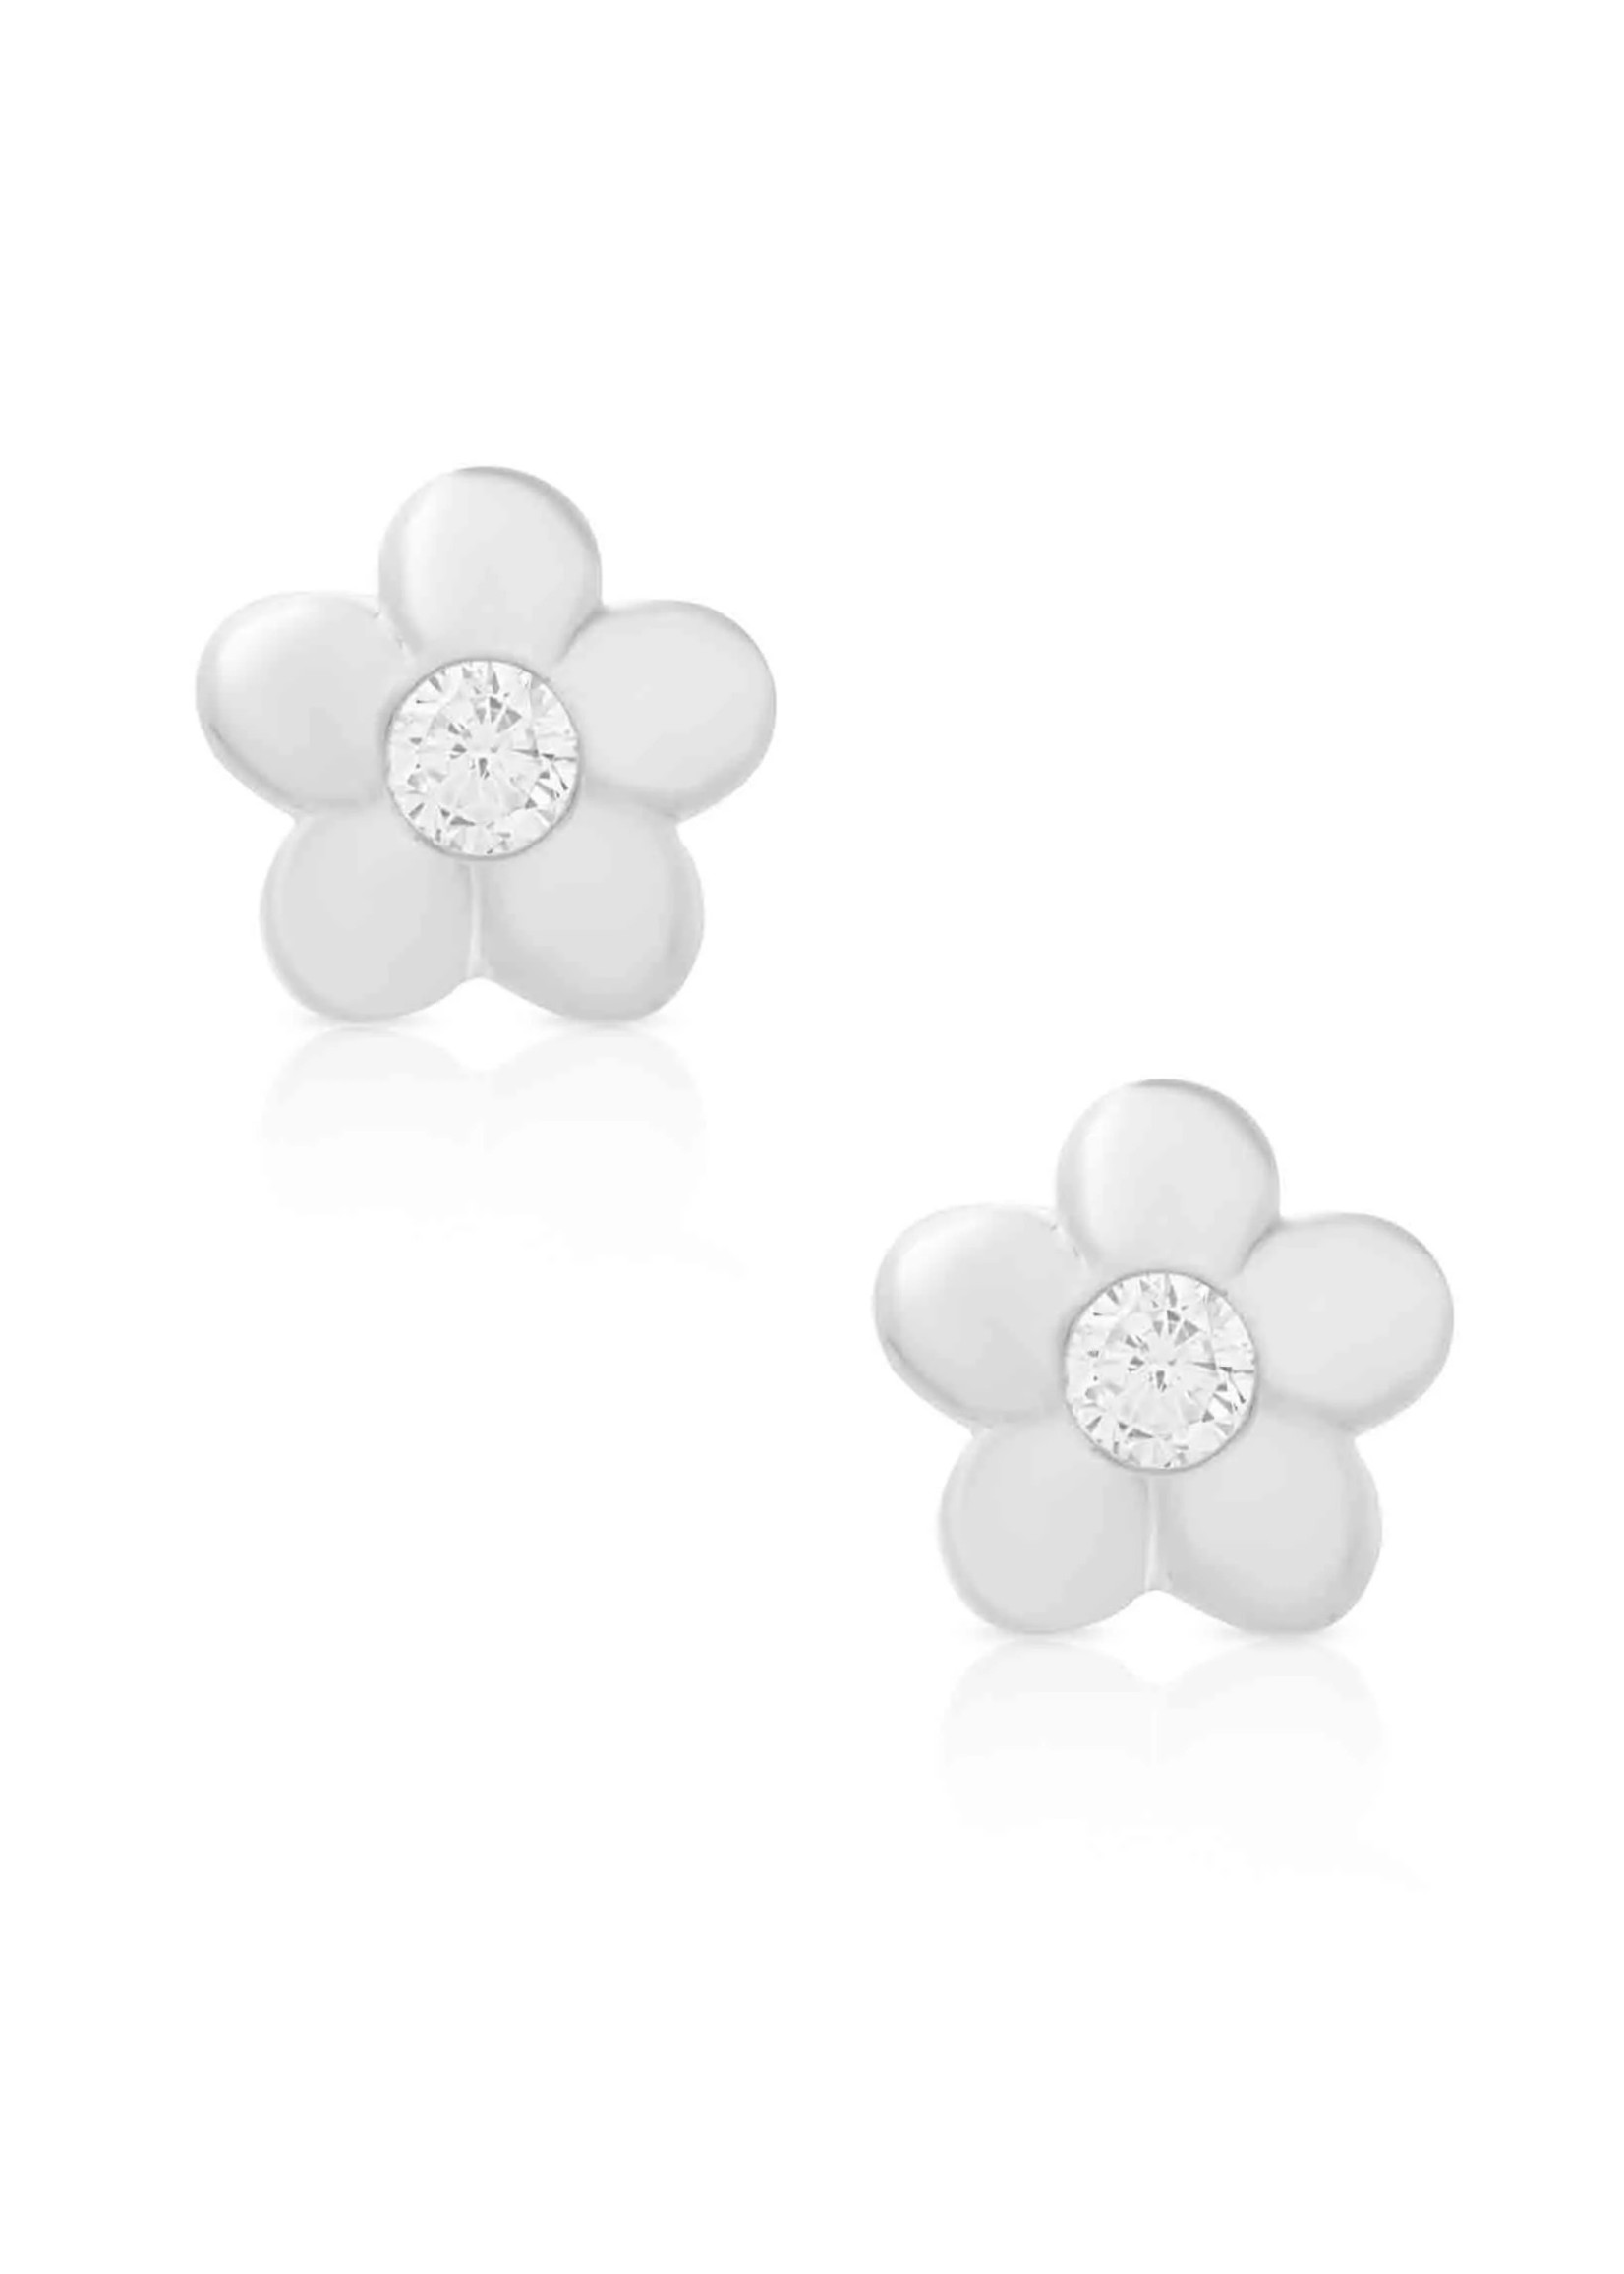 Lily Nily Flower CZ SS Earrings